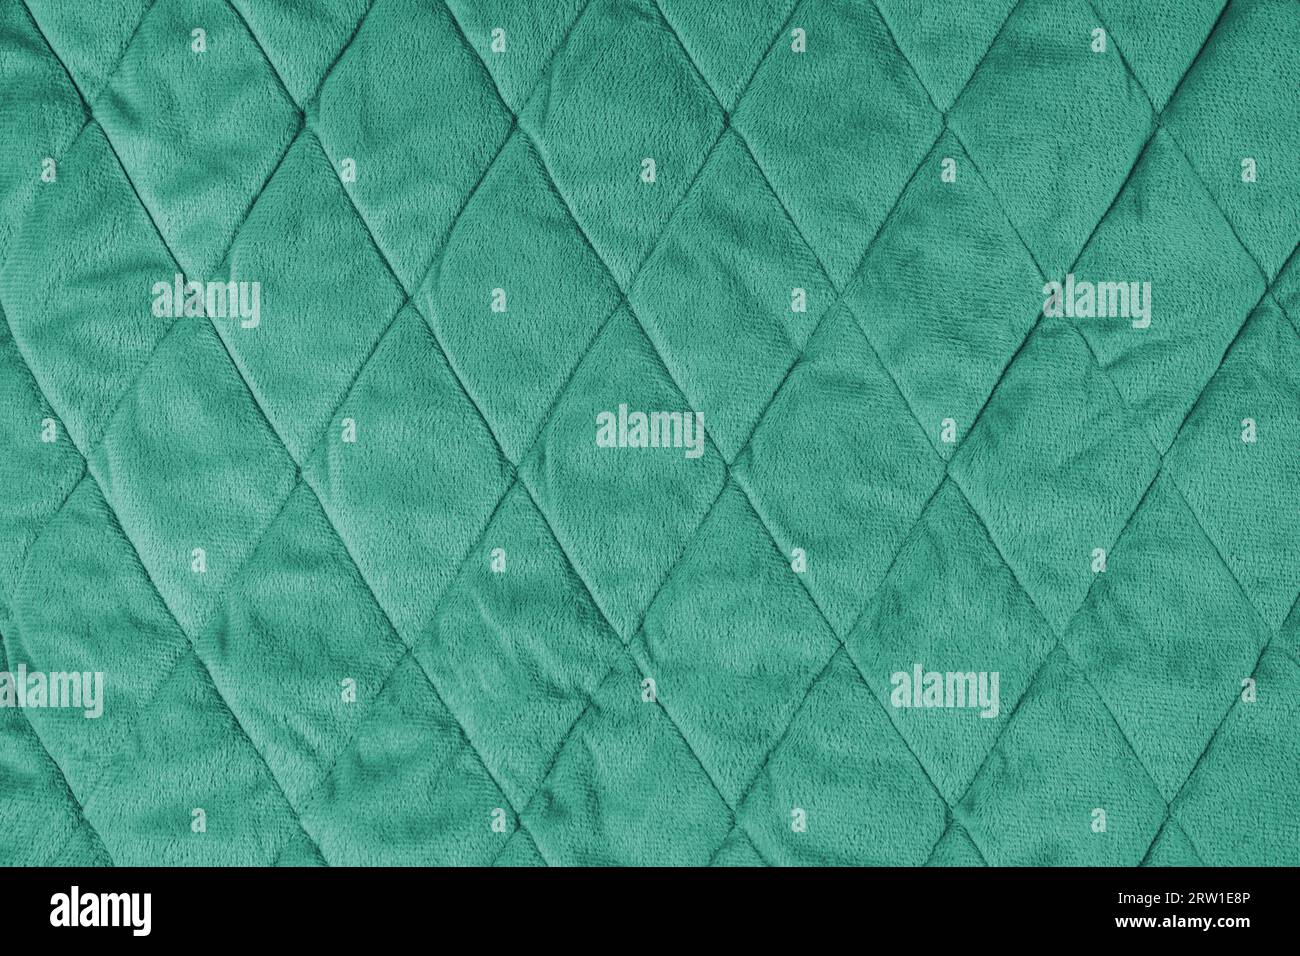 Quilted velours fabric background. Green texture blanket or puffer jacket, stiched with diamond pattern, soft wrinkled surface, crupmed textile Stock Photo